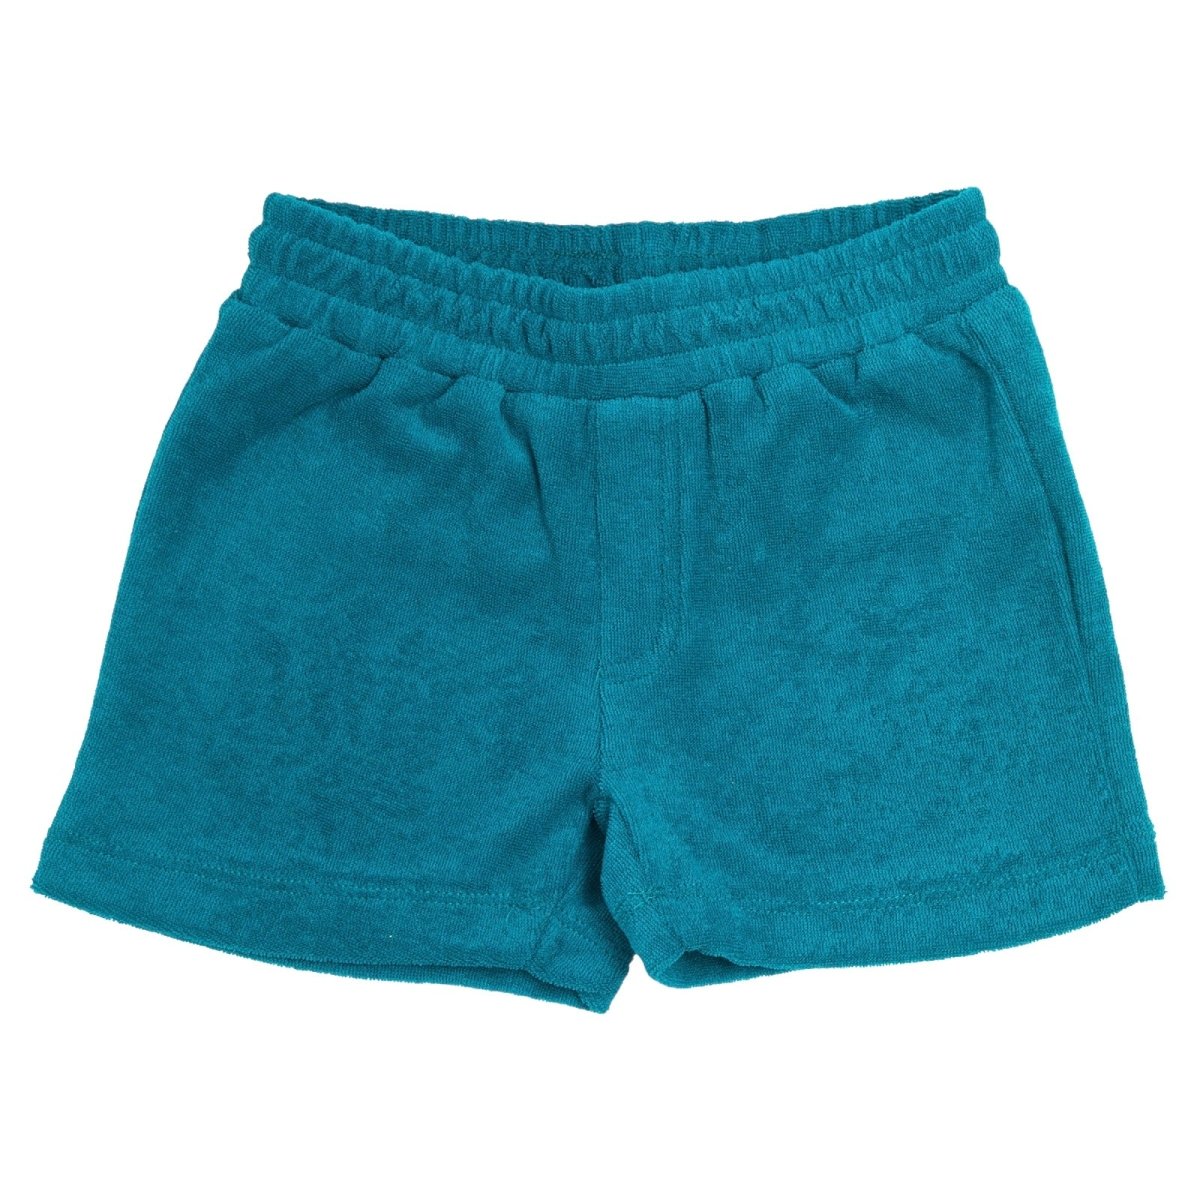 TERRY SOFT & COMFY SHORTS - CHASER KIDS